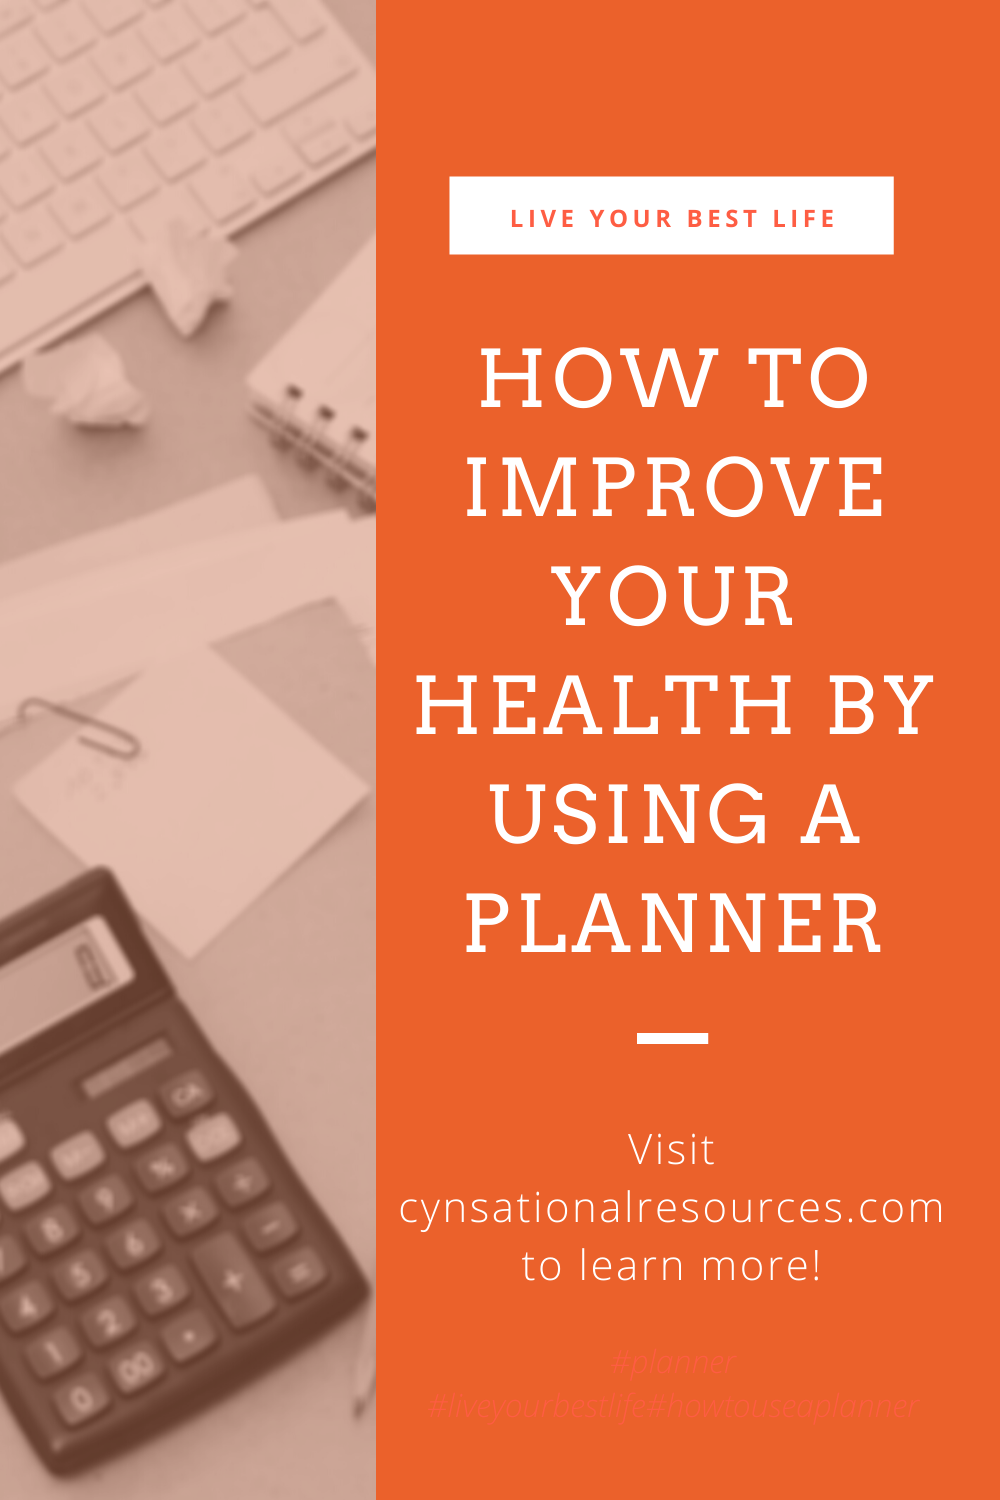 How to Improve Your Health by Using a Planner